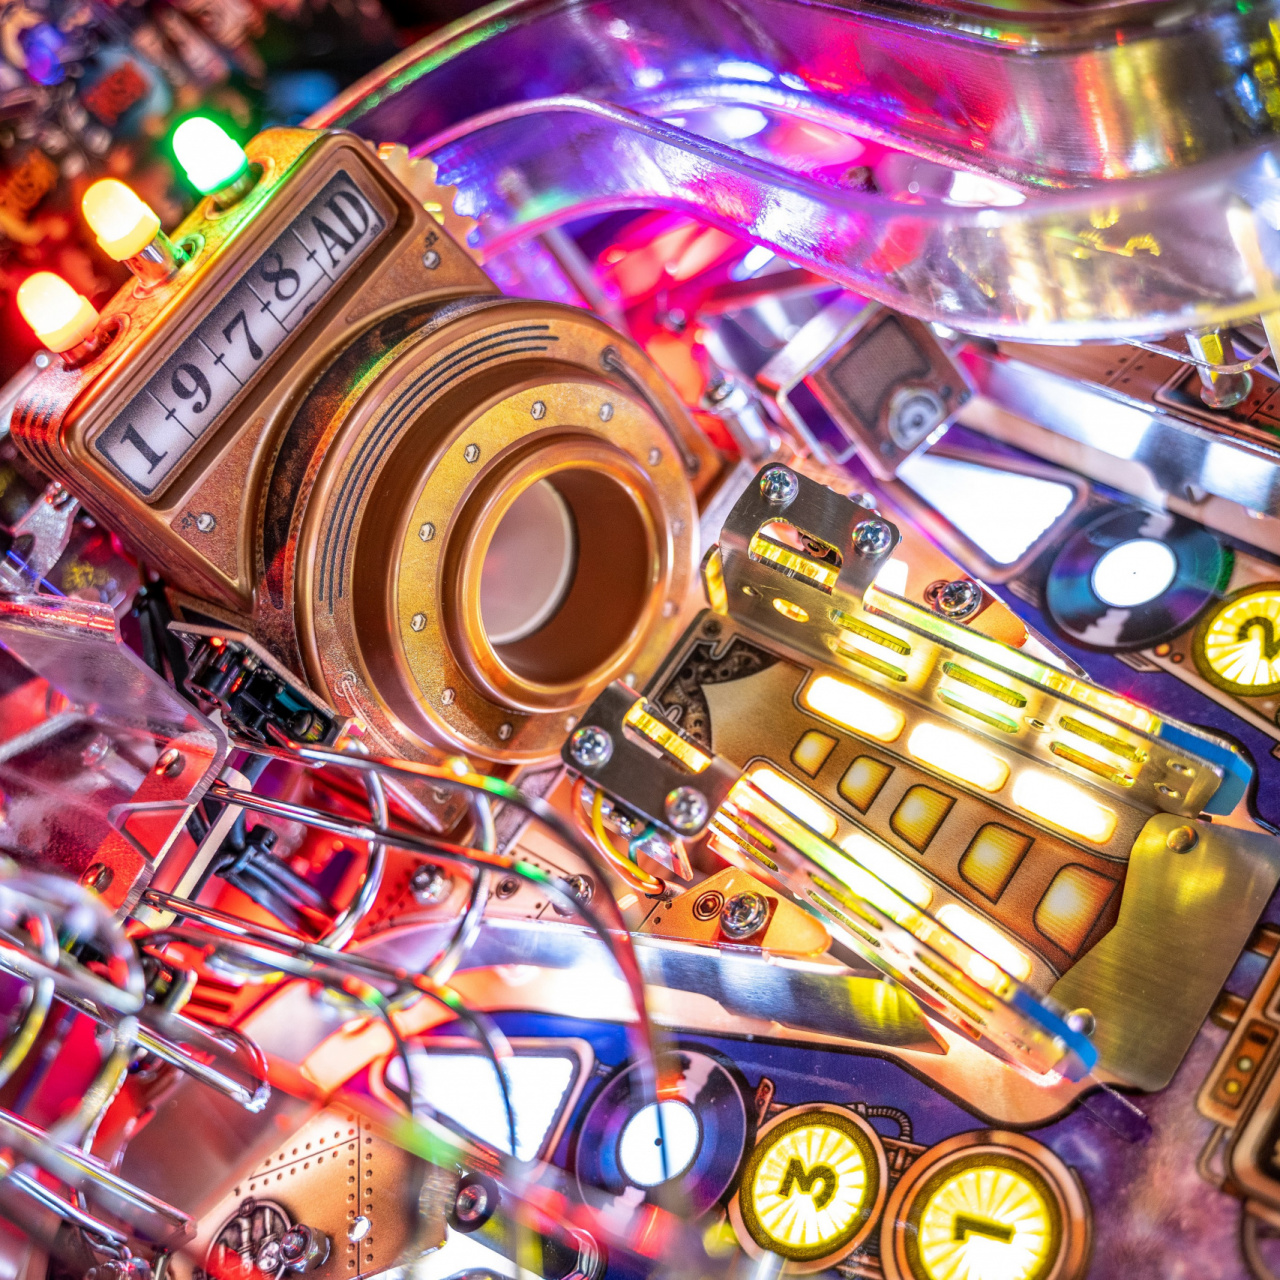 Stern Pinball Announces New Rush Pinball Machines Featuring Insider Connected™